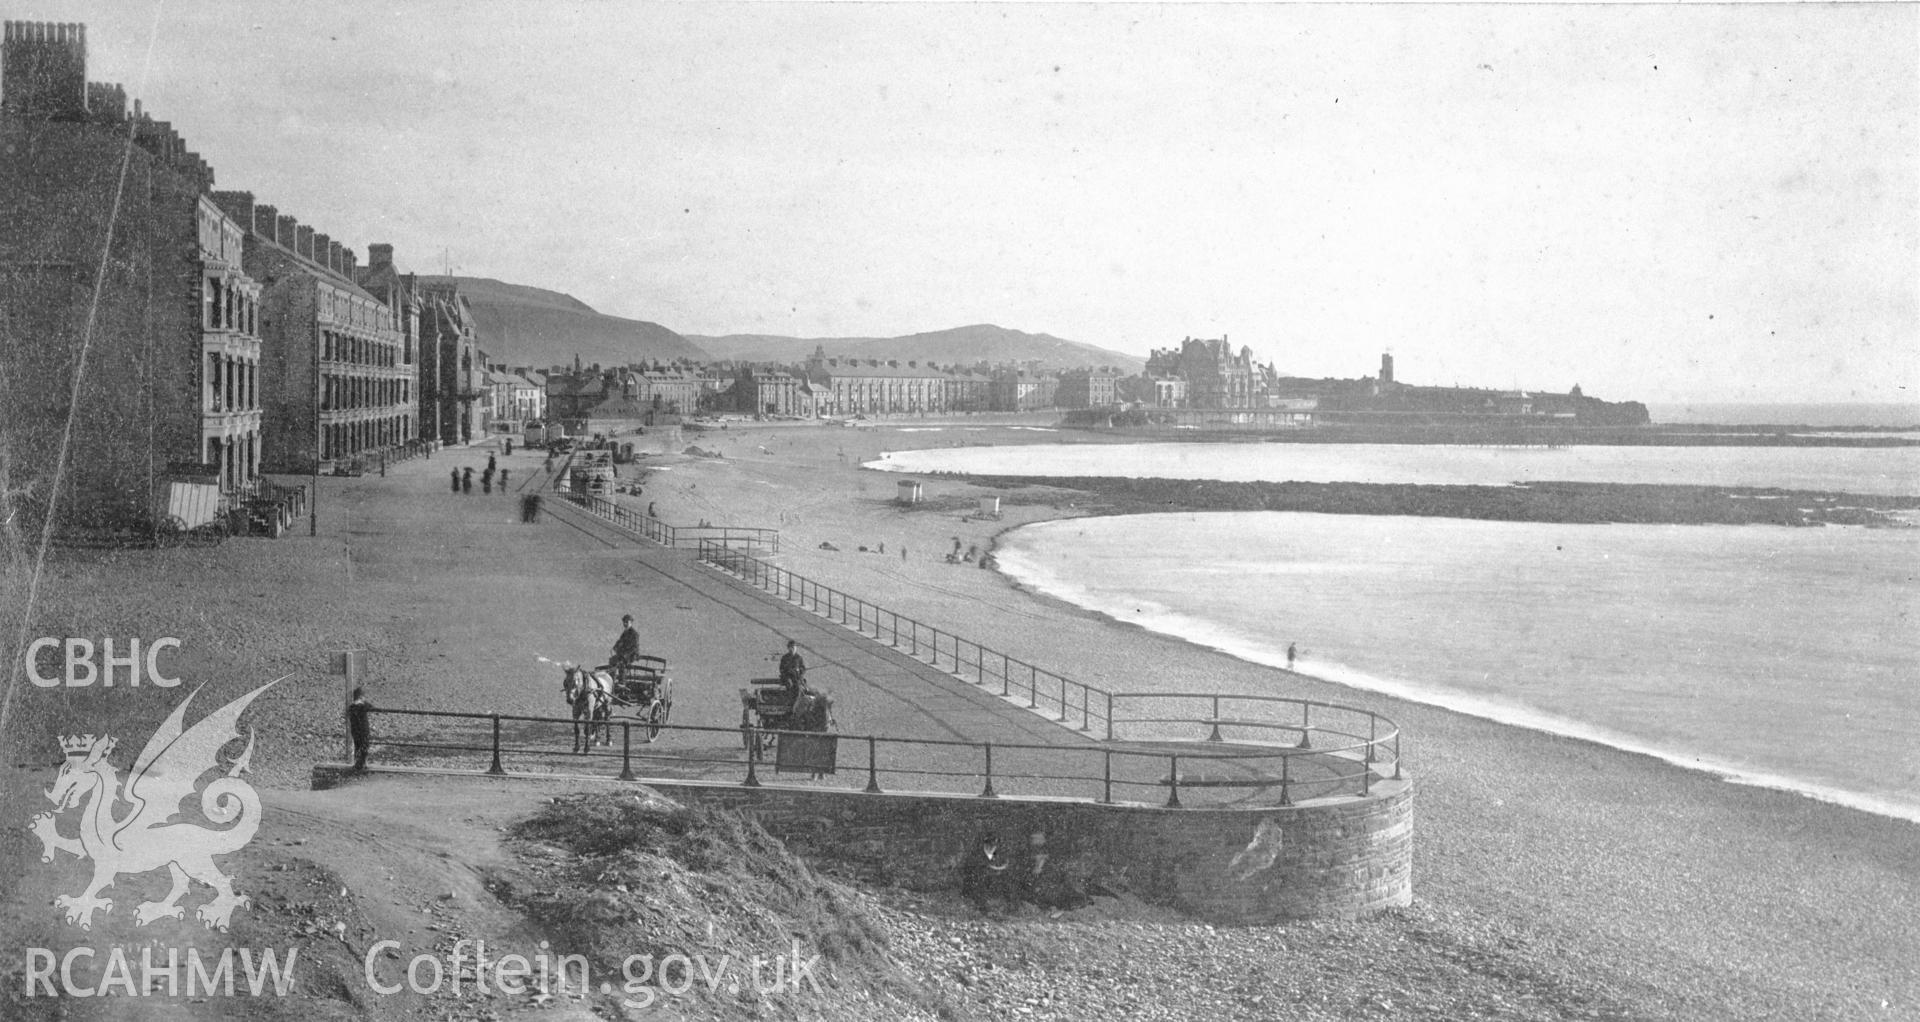 Black and white acetate negative showing a view of the Promenade at Aberystwyth, taken from the base of Constitution Hill.